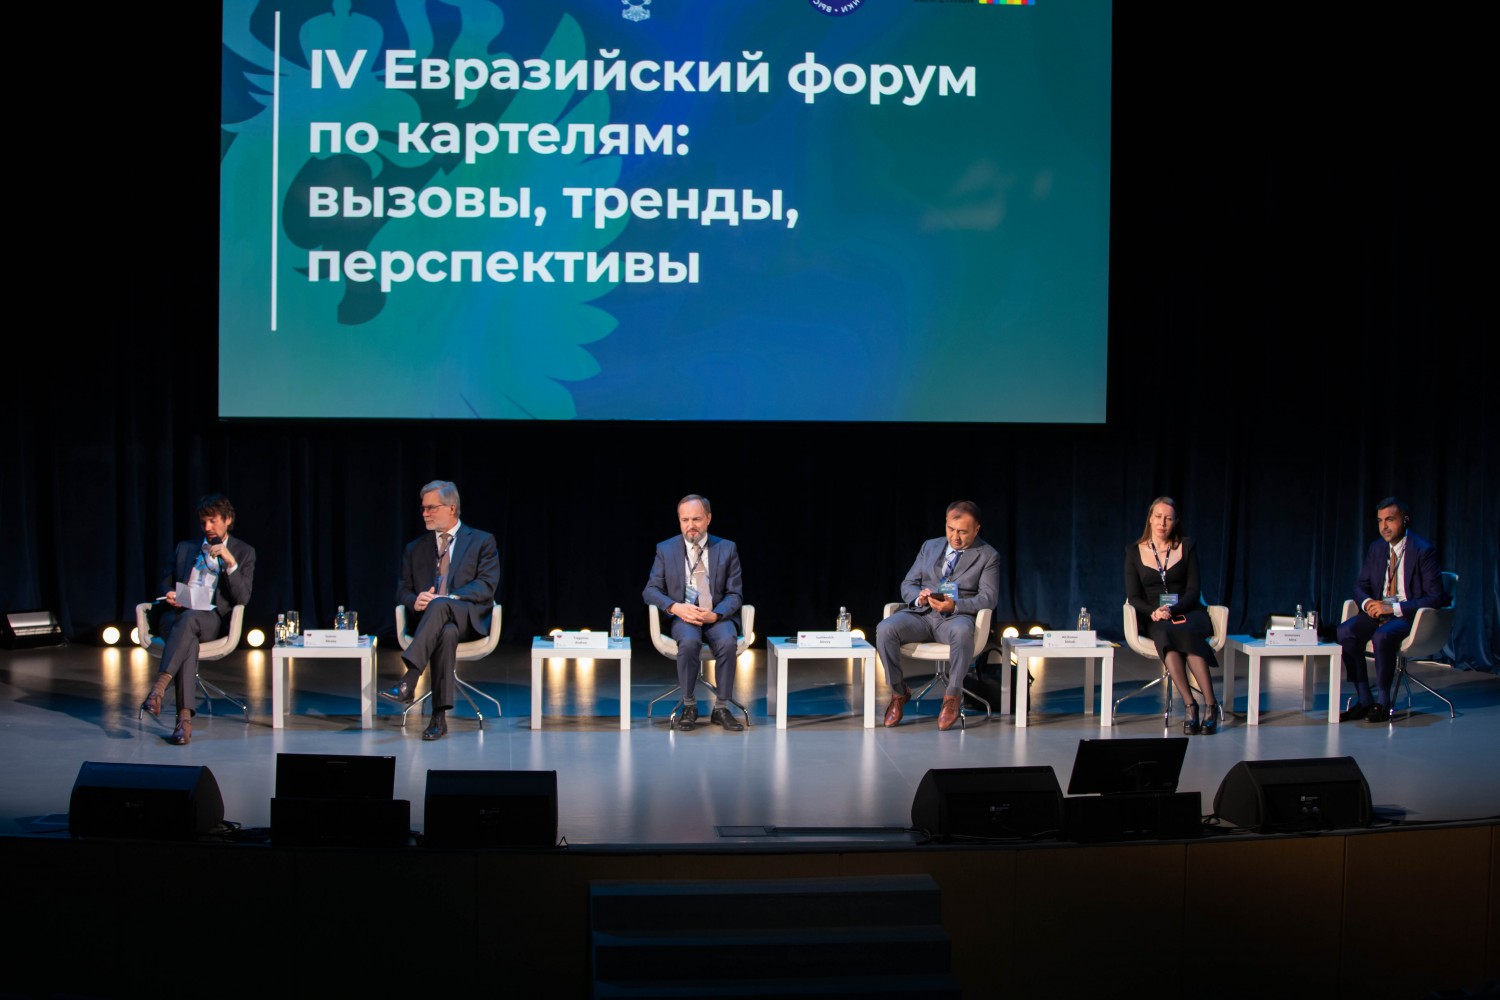 The IV Eurasian Anti-cartel Forum Took Place at the HSE University 